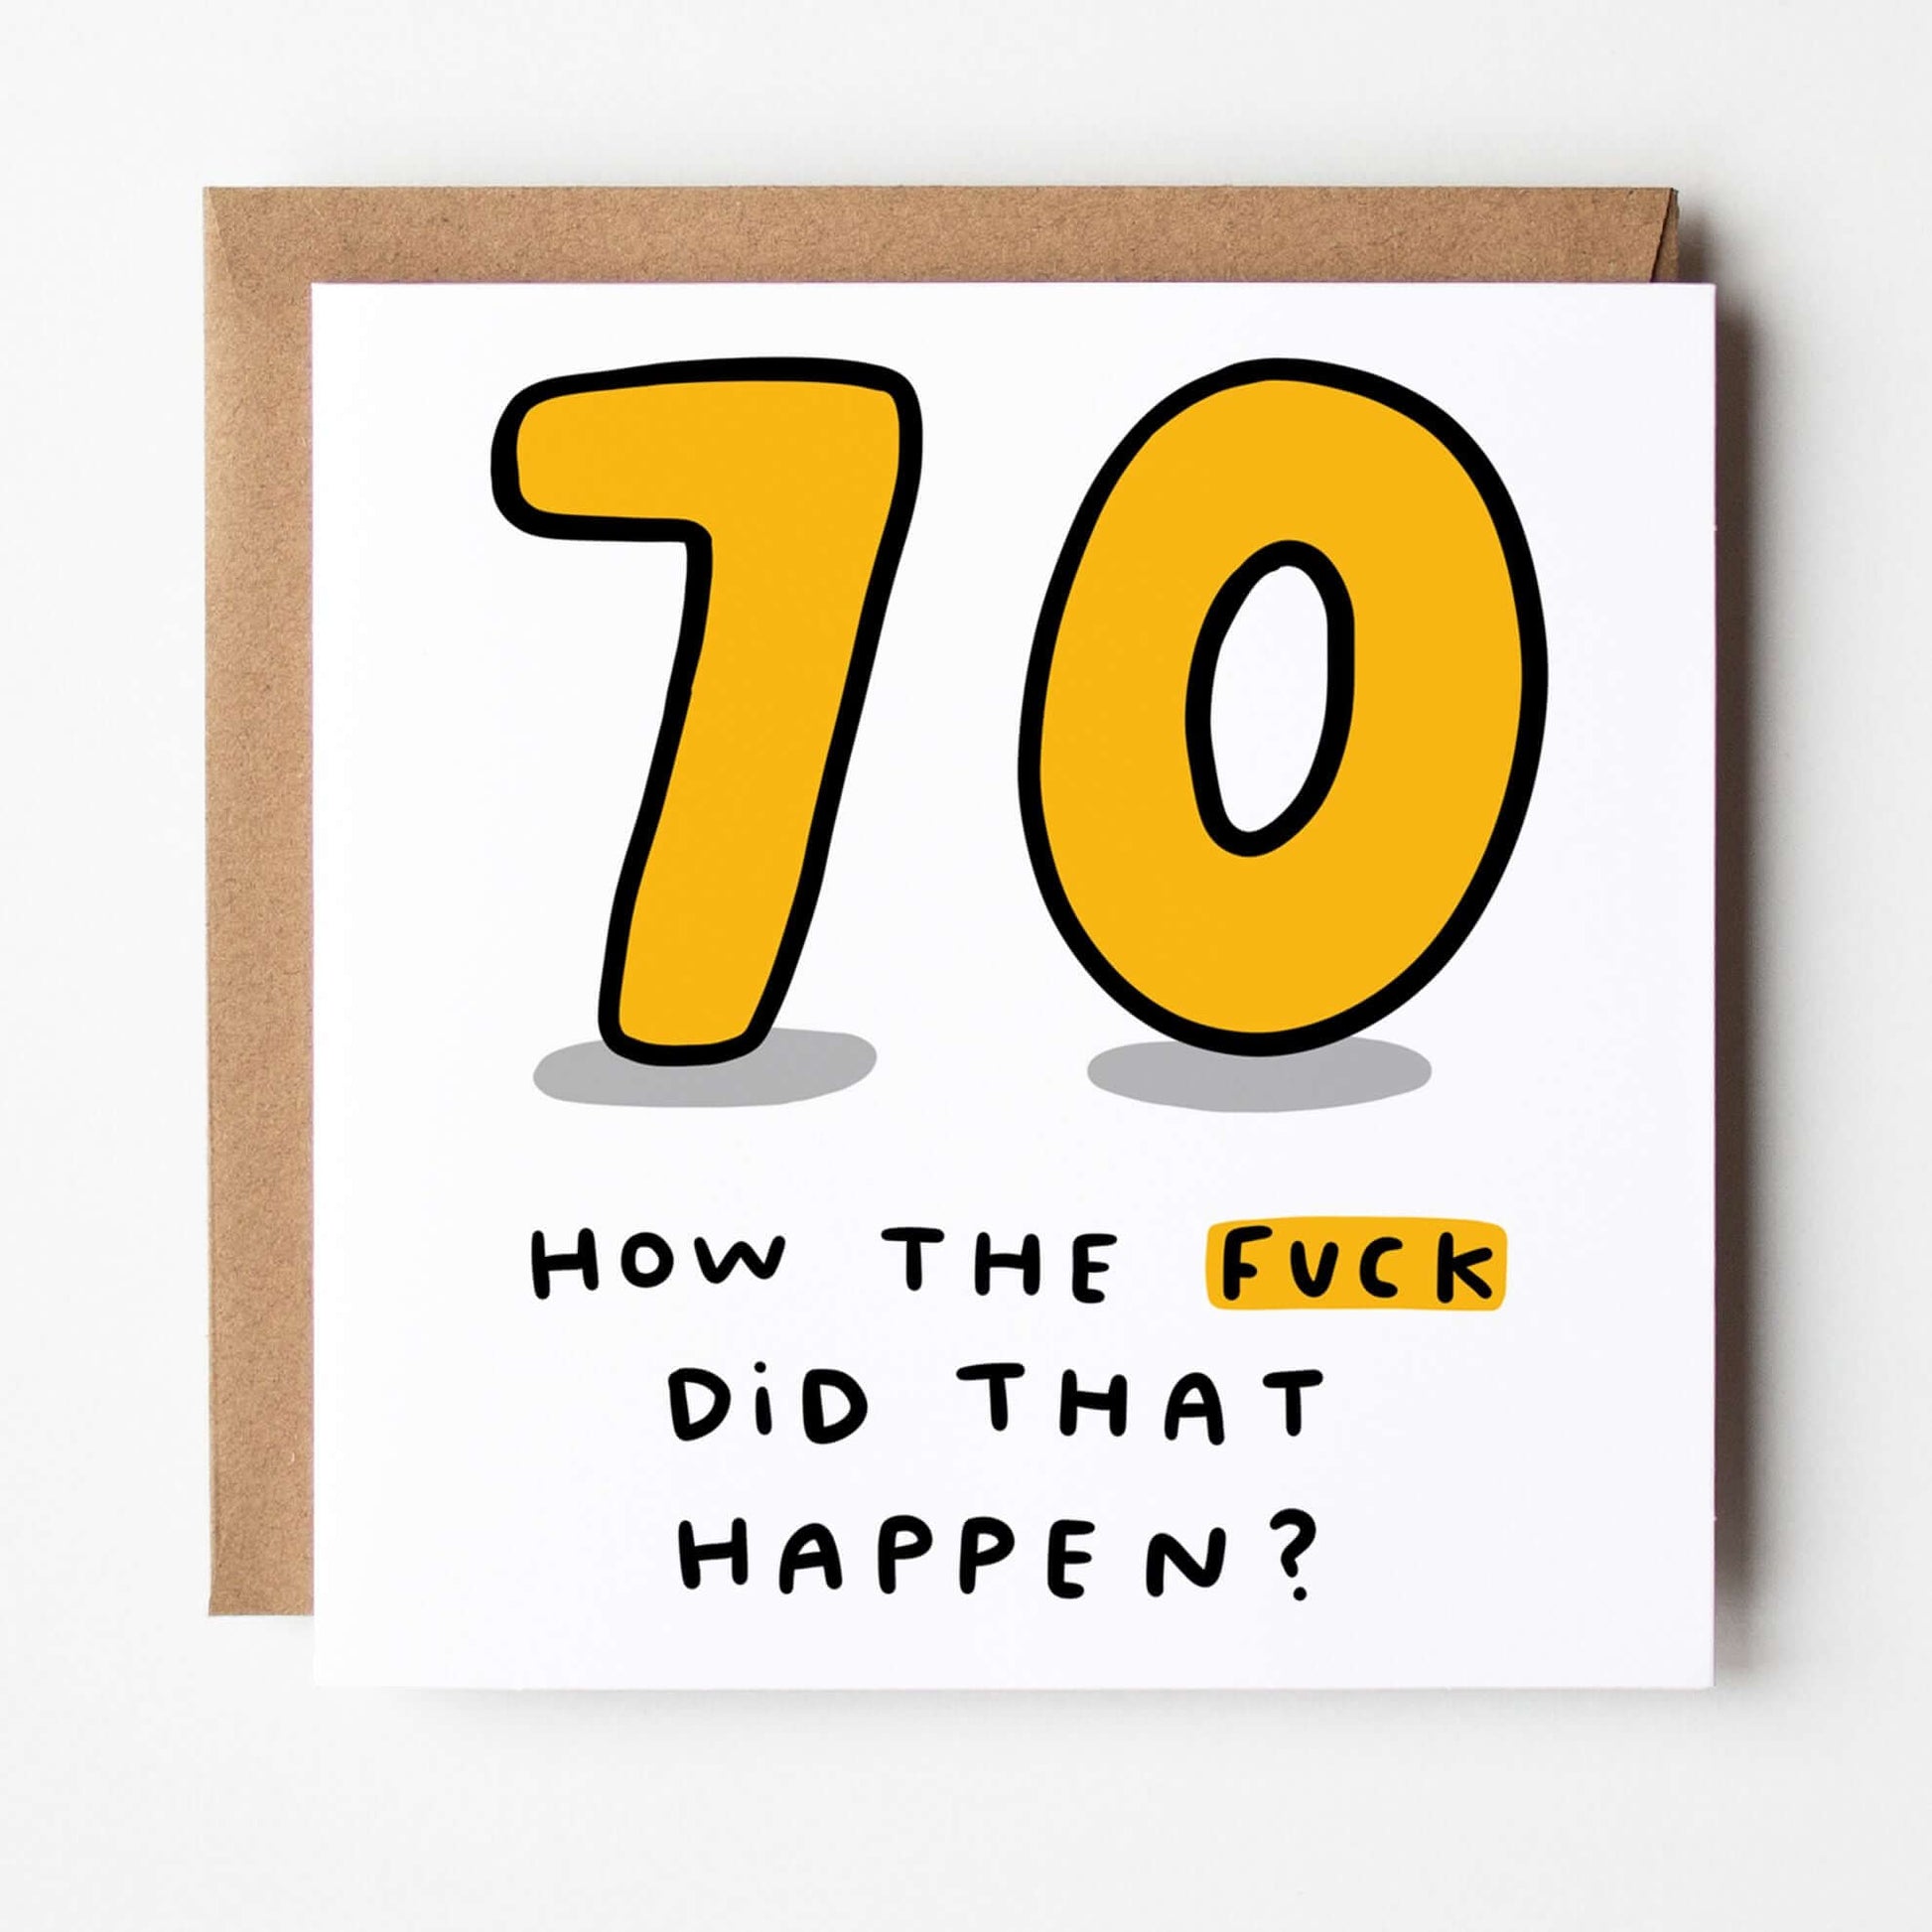 Dandy Sloth 70 How The Fuck Did That Happen 70th Birthday Square Greeting Card Birthday Cards Dandy Sloth